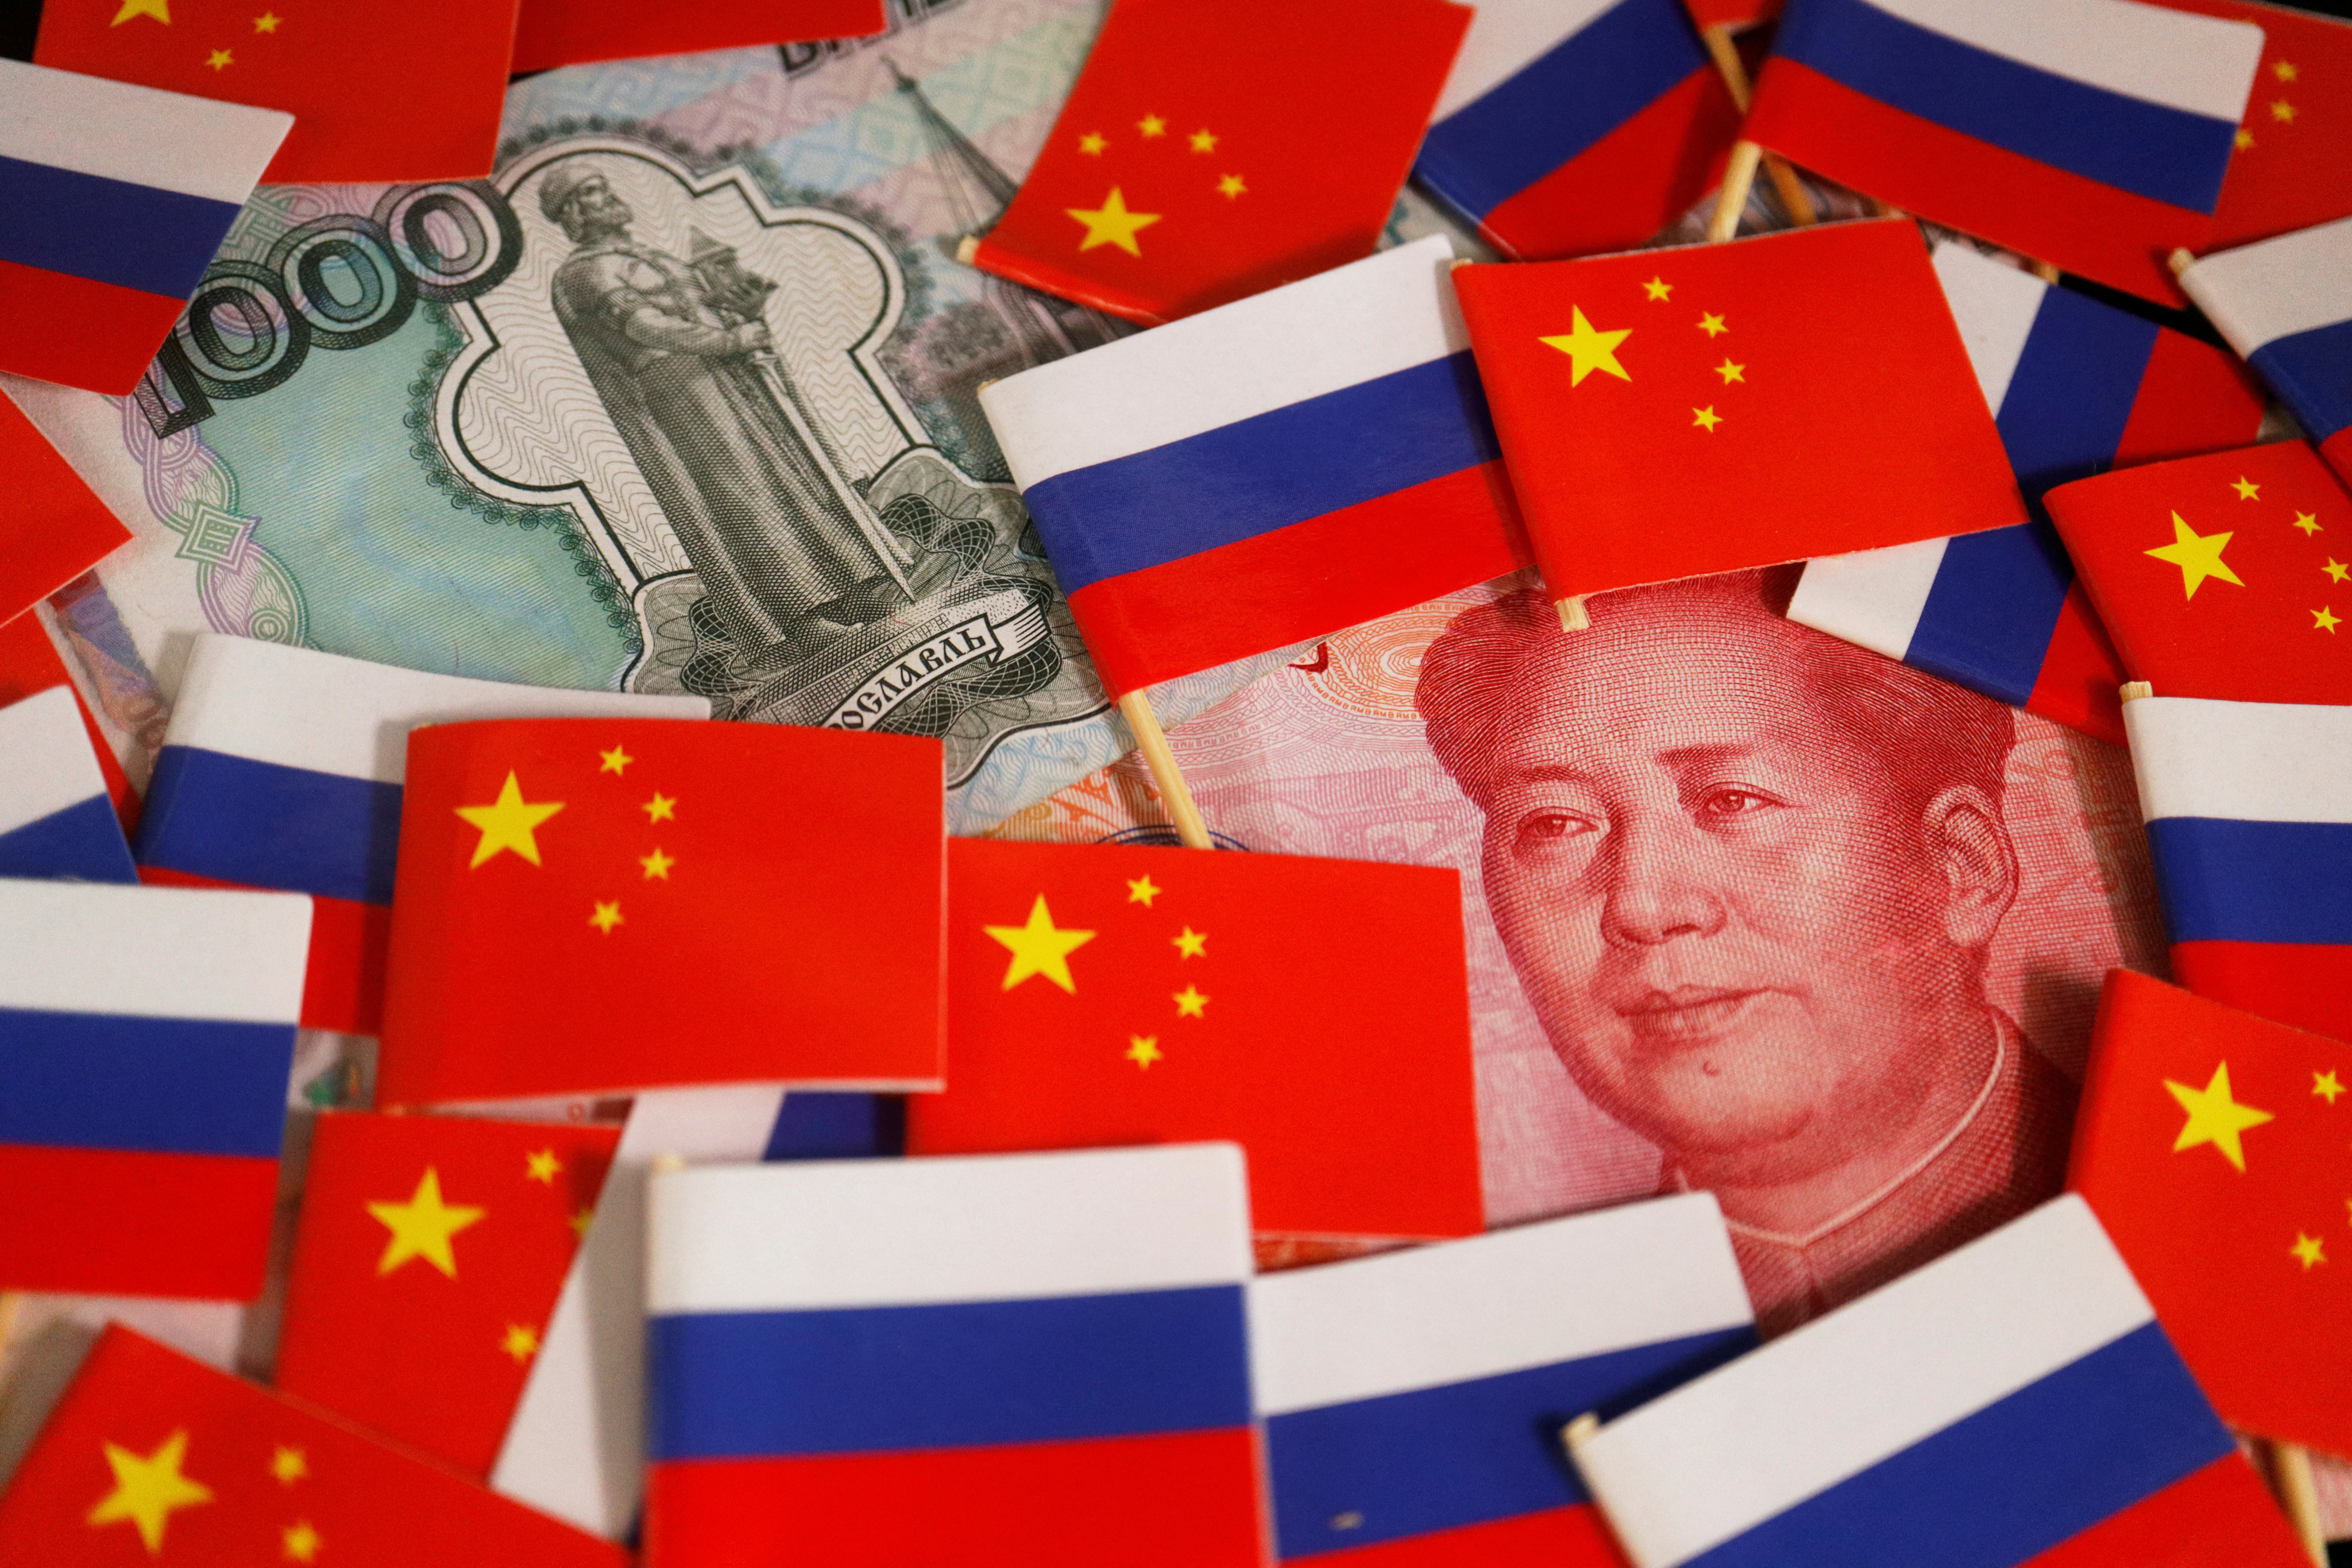 Chinese yuan and Russian rouble banknotes are seen surrounded by the national flags of China and Russia. Photo: Reuters